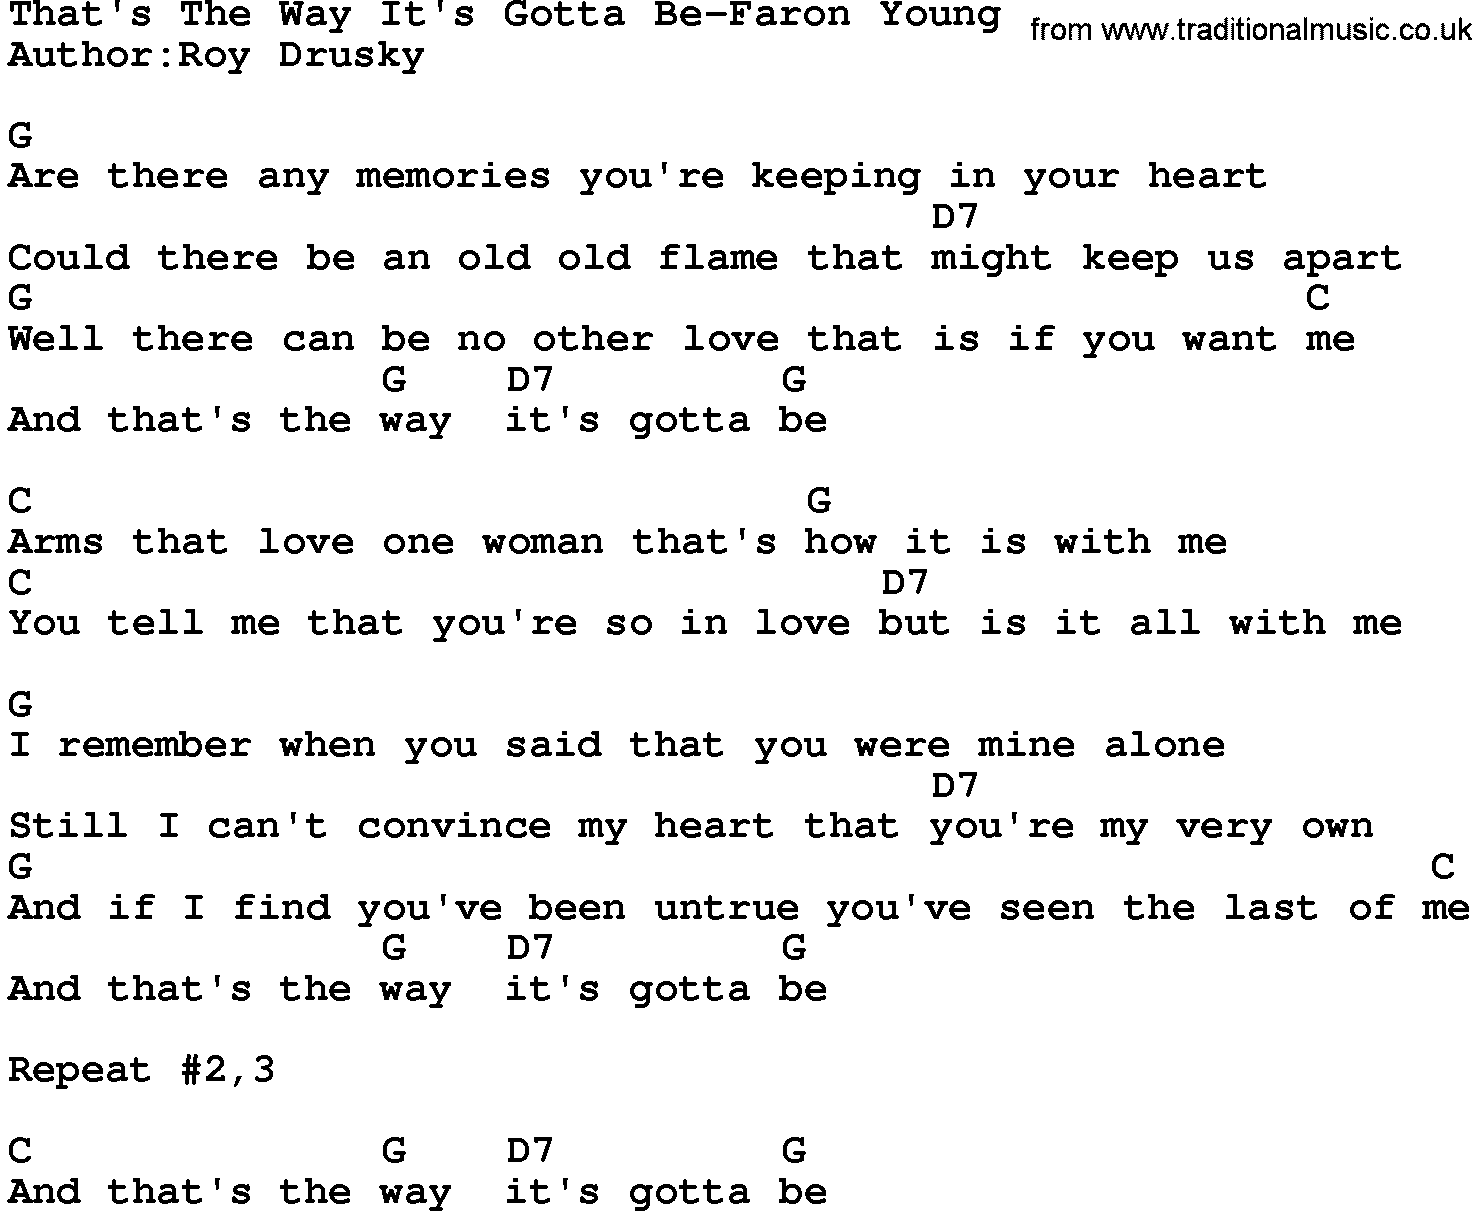 Country music song: That's The Way It's Gotta Be-Faron Young lyrics and chords